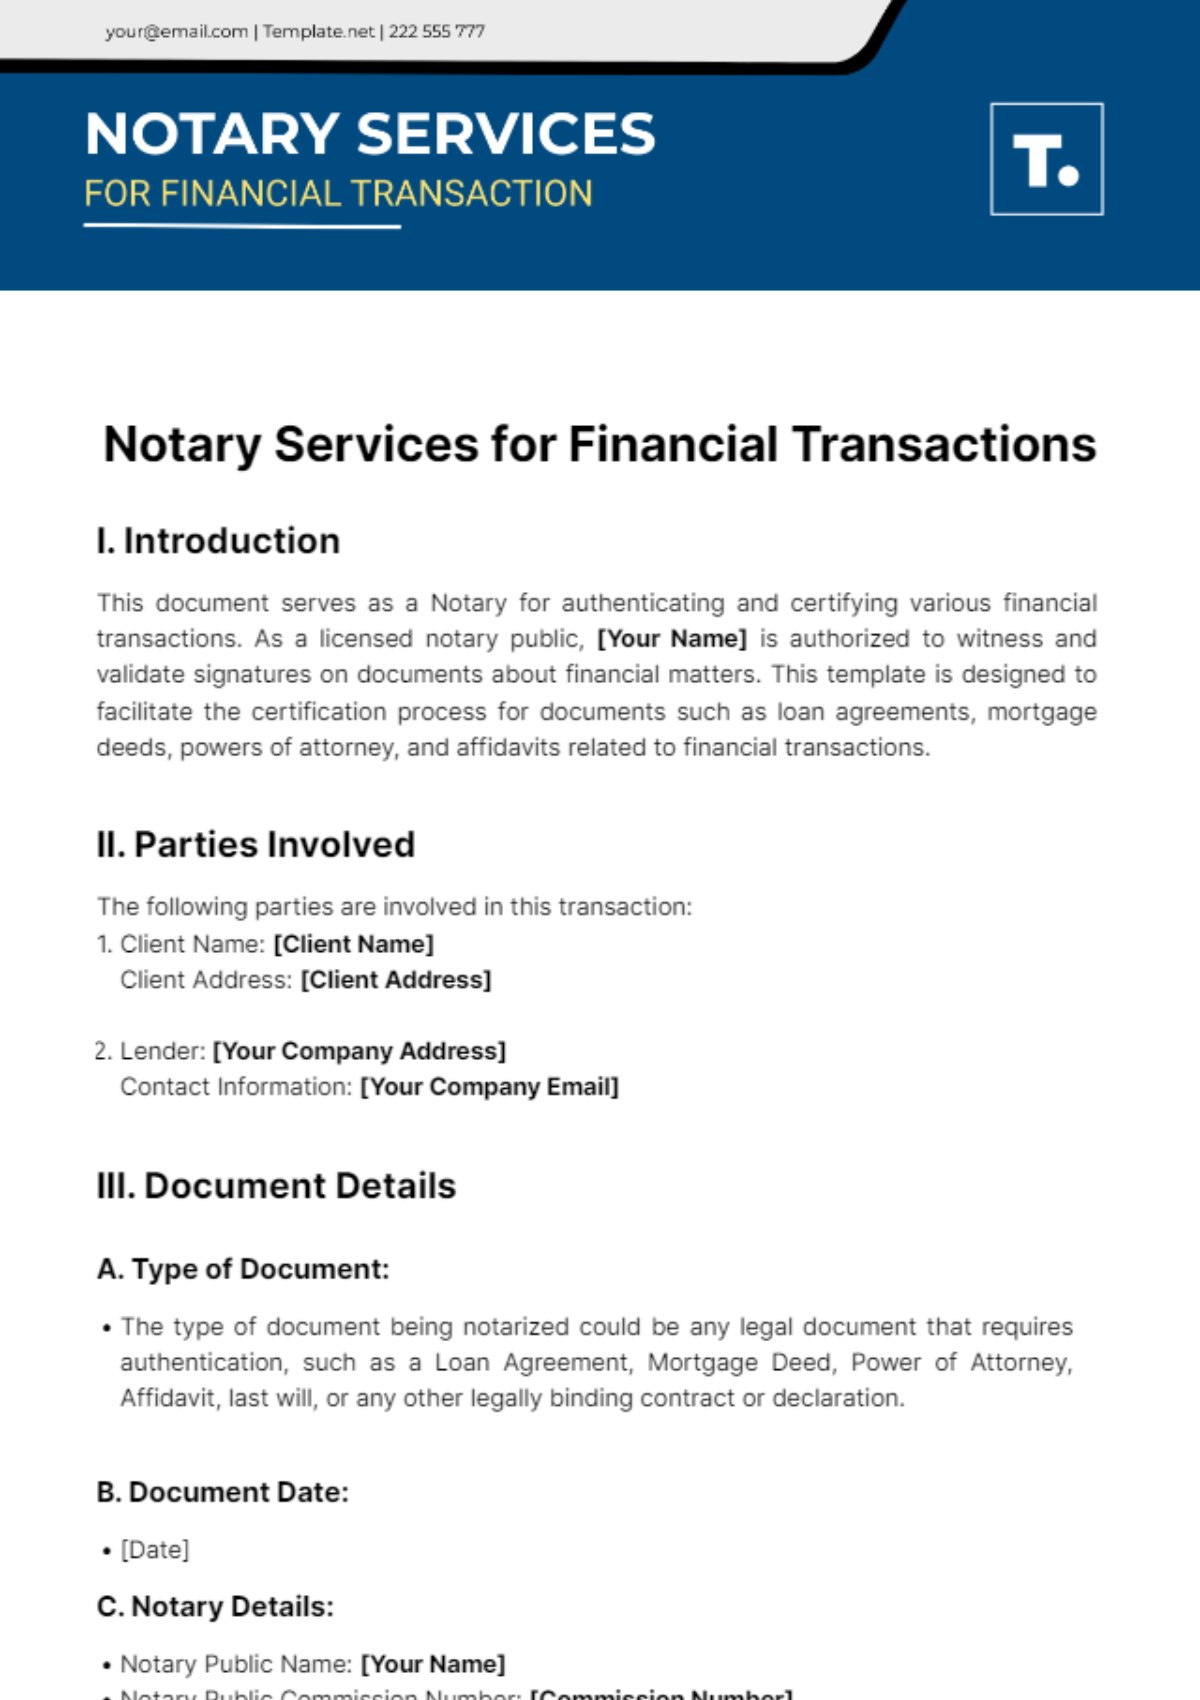 Notary Services for Financial Transactions Template